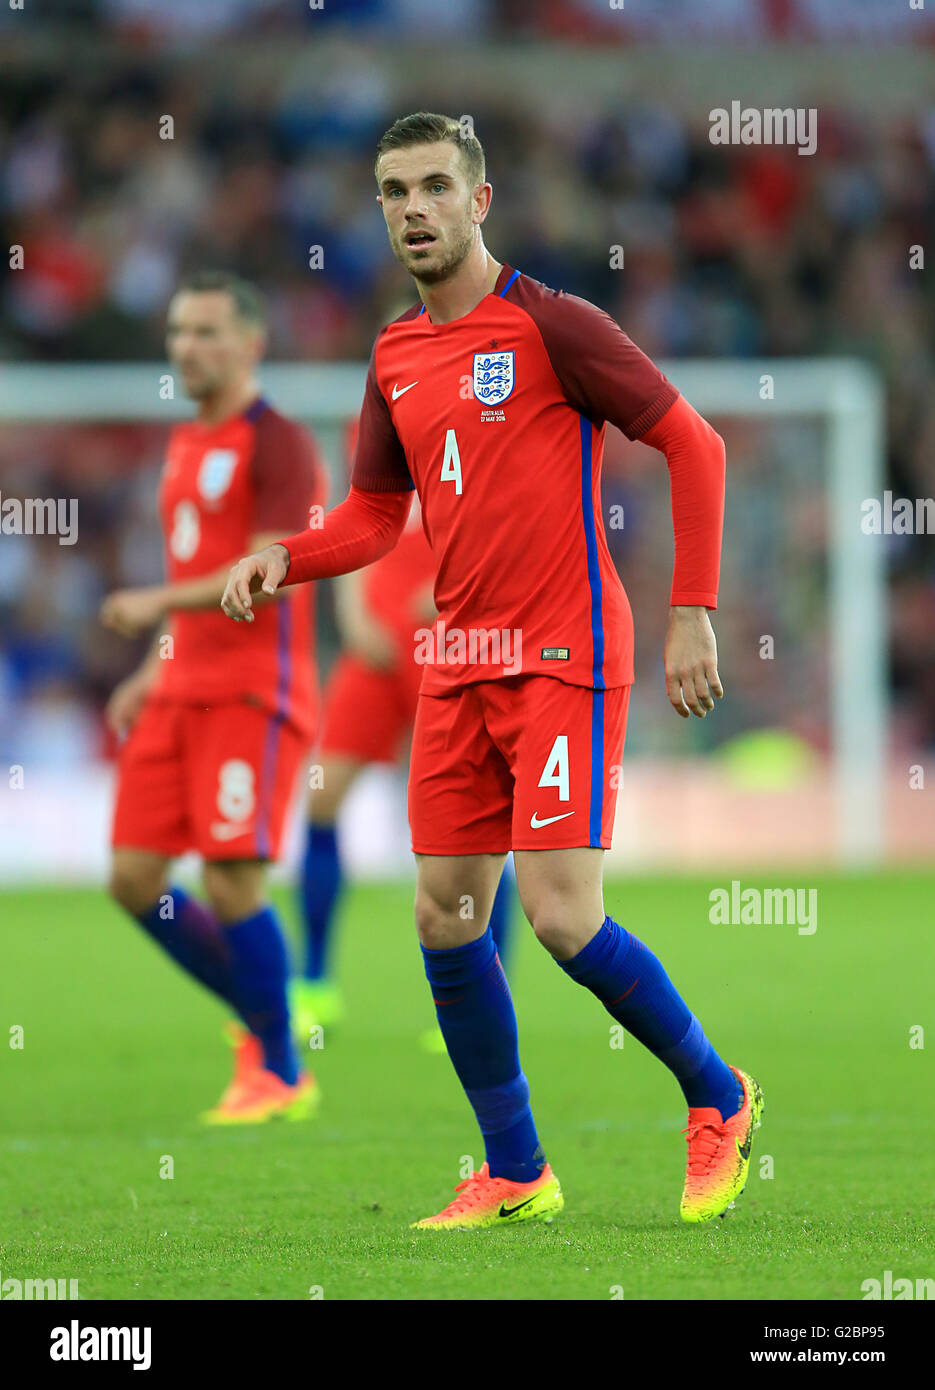 England's Jordan Henderson during the International Friendly at the Stadium of Light, Sunderland. PRESS ASSOCIATION Photo. Picture date: Friday May 27, 2016. See PA story SOCCER England. Photo credit should read: Tim Goode/PA Wire. Stock Photo